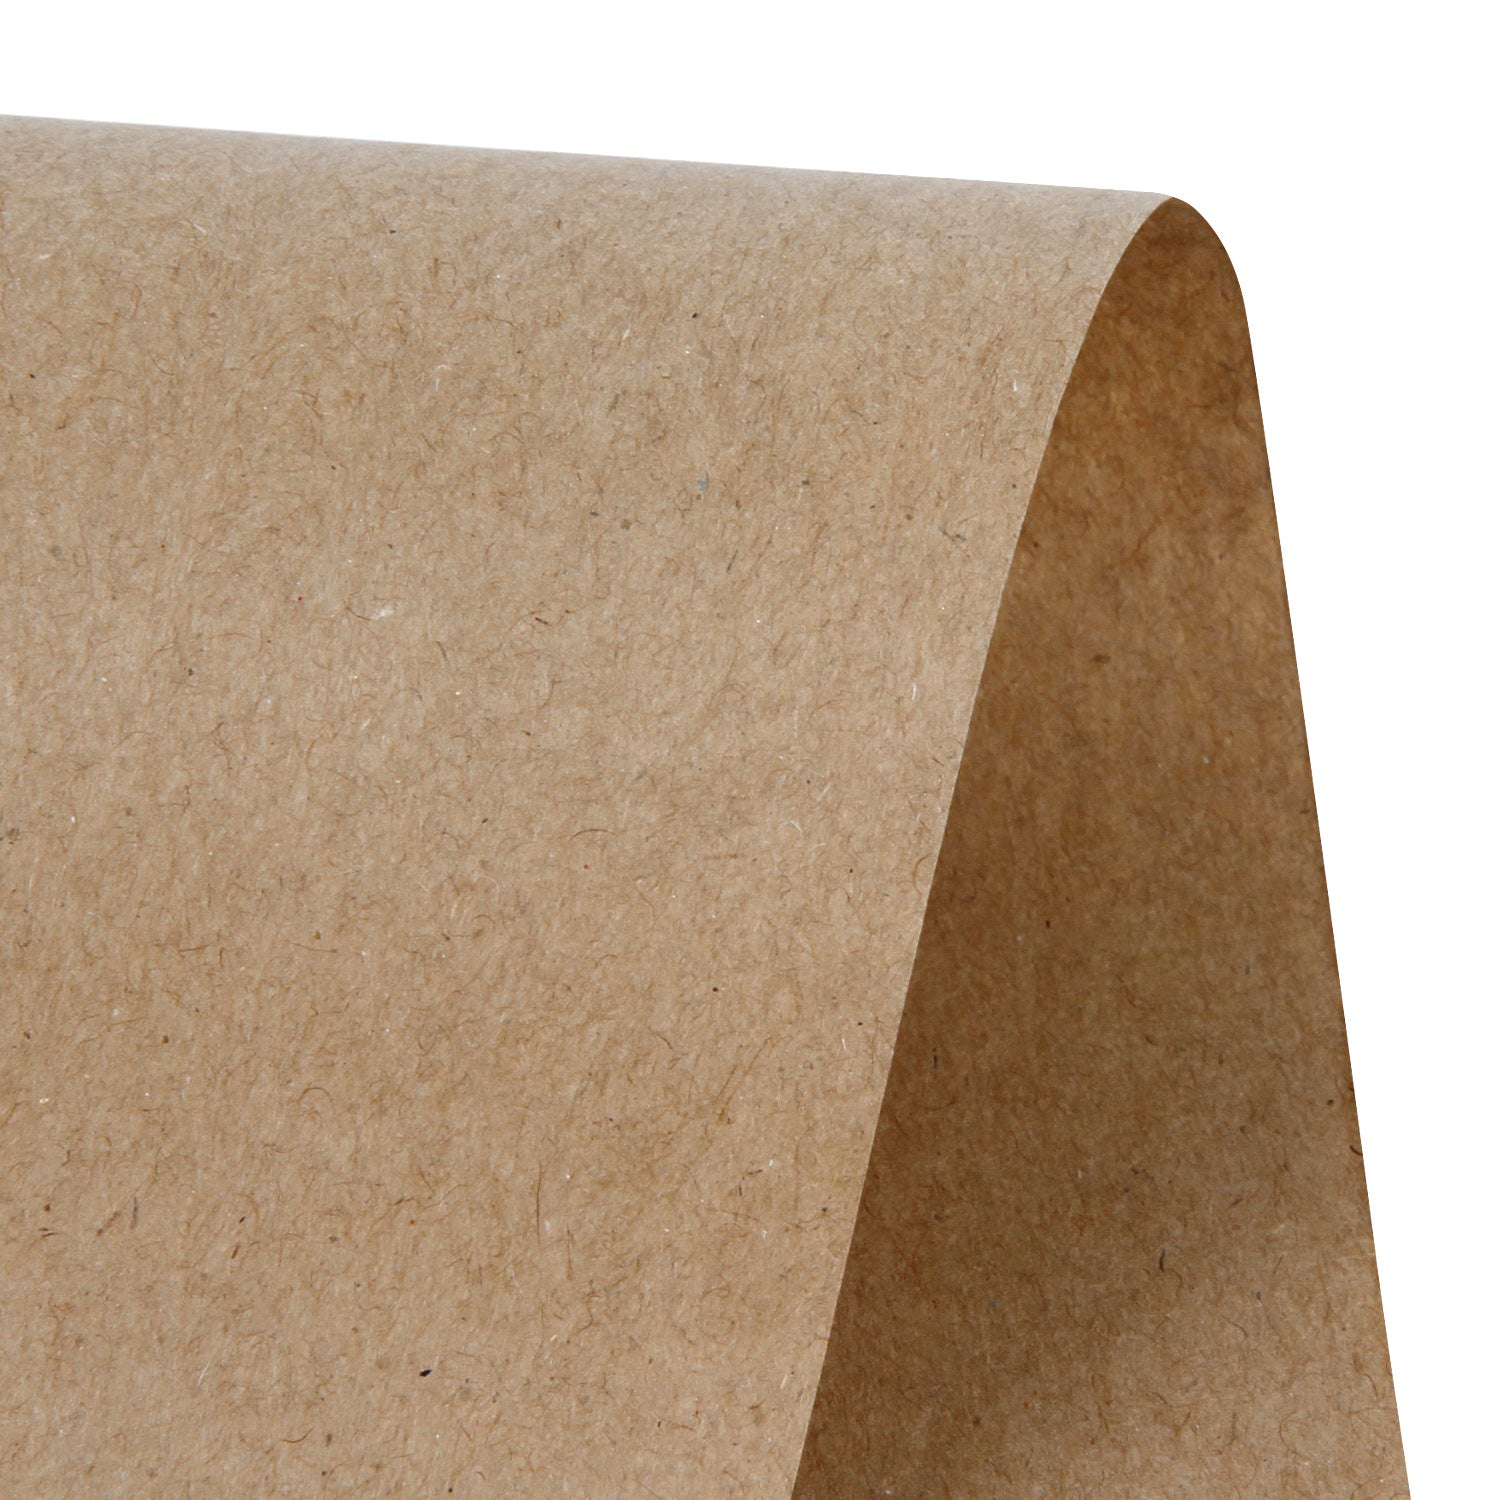 Brown Kraft Paper Roll - 36 Inch x 100 Feet - Recycled Paper